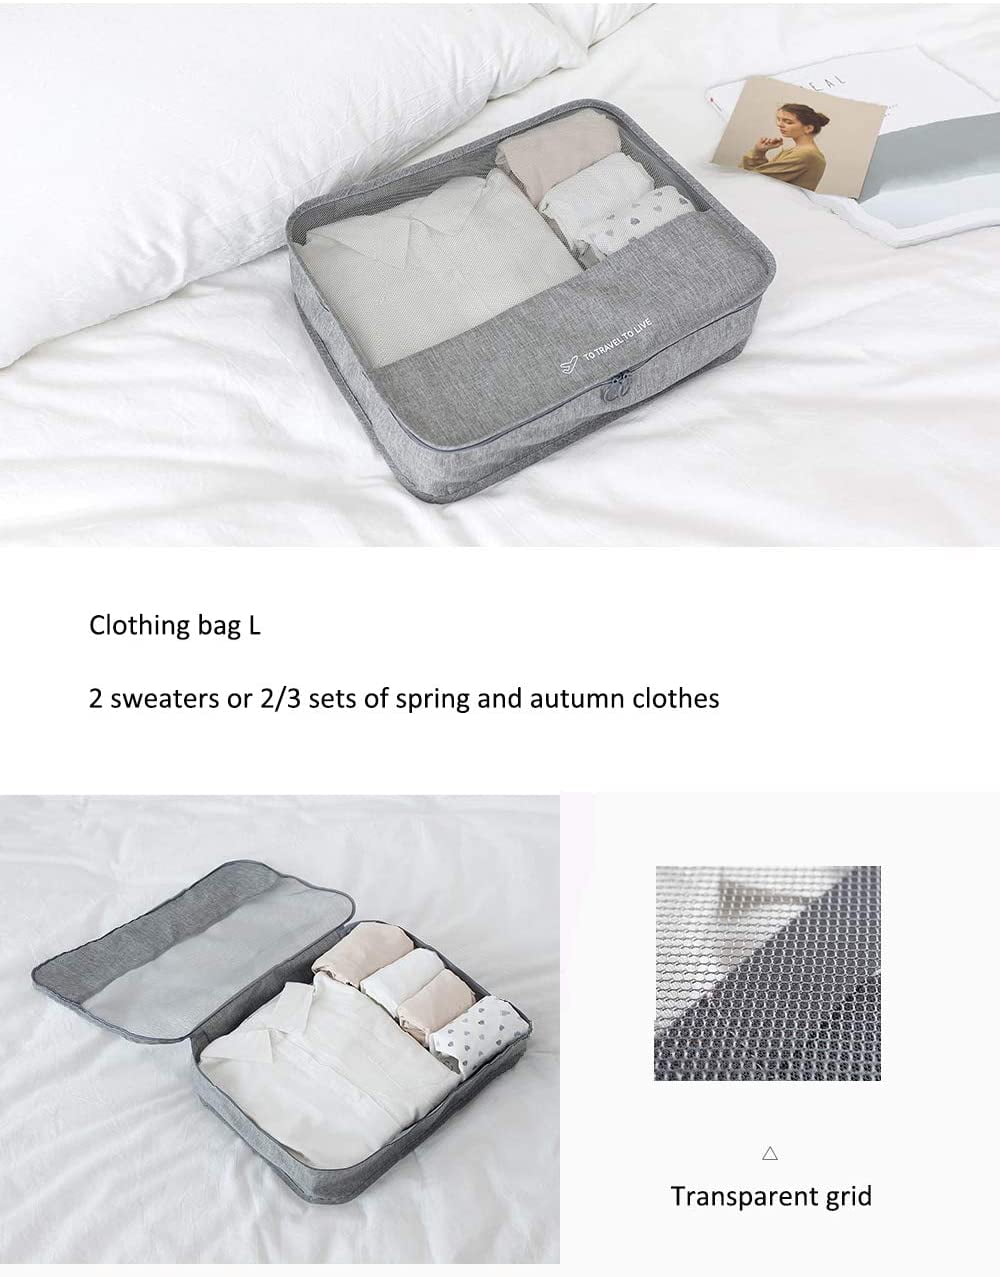 HEYOMART Packing Cubes Oxford Compression Bags 6PCS 7PCS 8PCS Set for Travel  Bags accessories Luggage Suitcase Organiser Waterproof Wash Bag Clothes  Organizer Pouch for Women Men